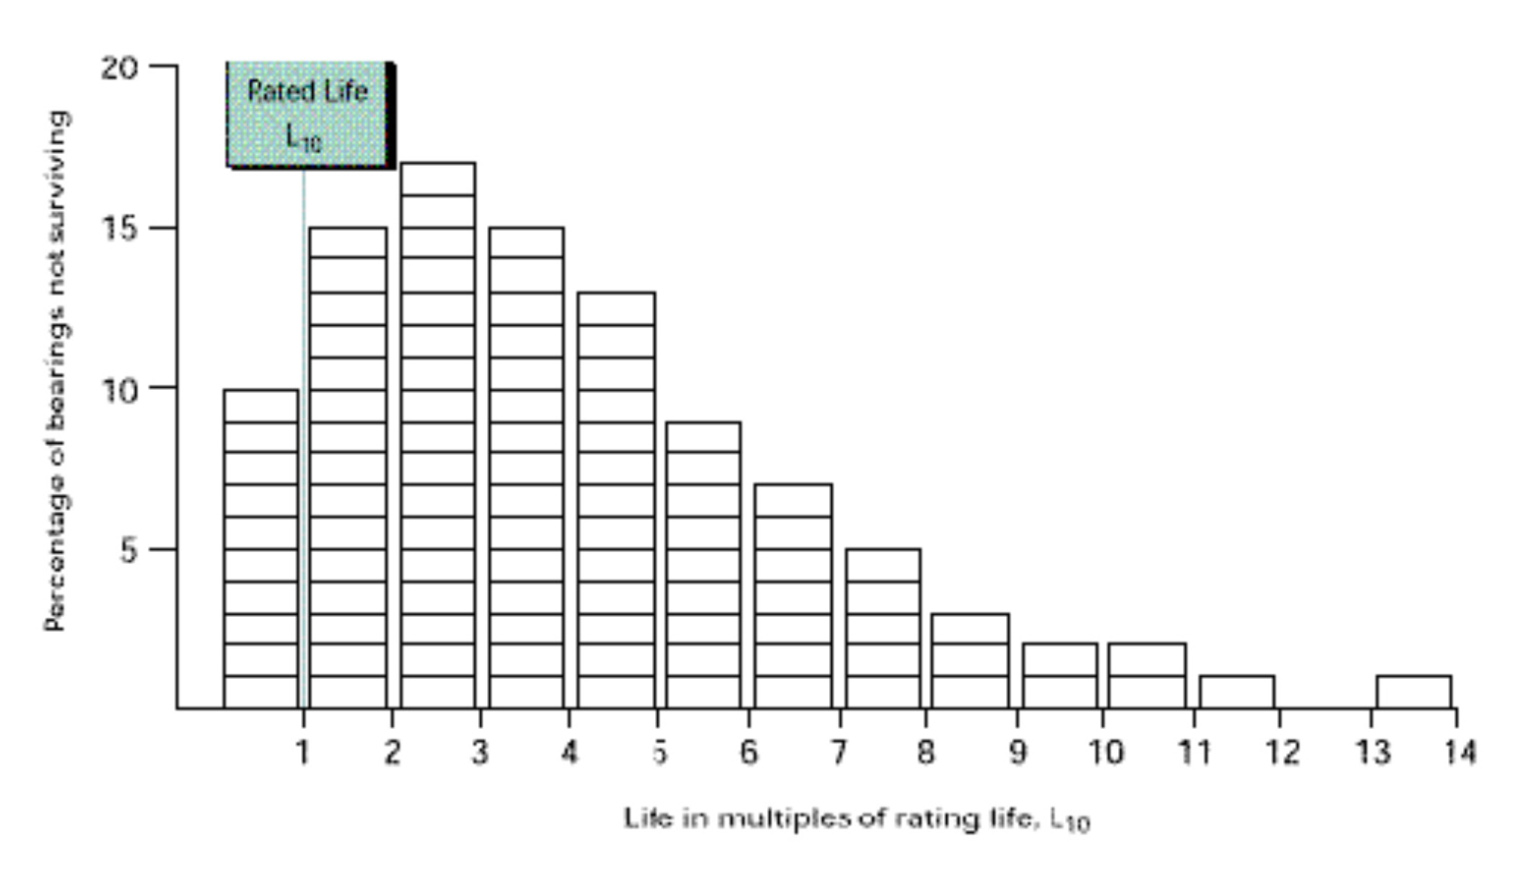 l10 bearing life, rated life l10, life in multiples of rating life l10, bearing life calculation chart